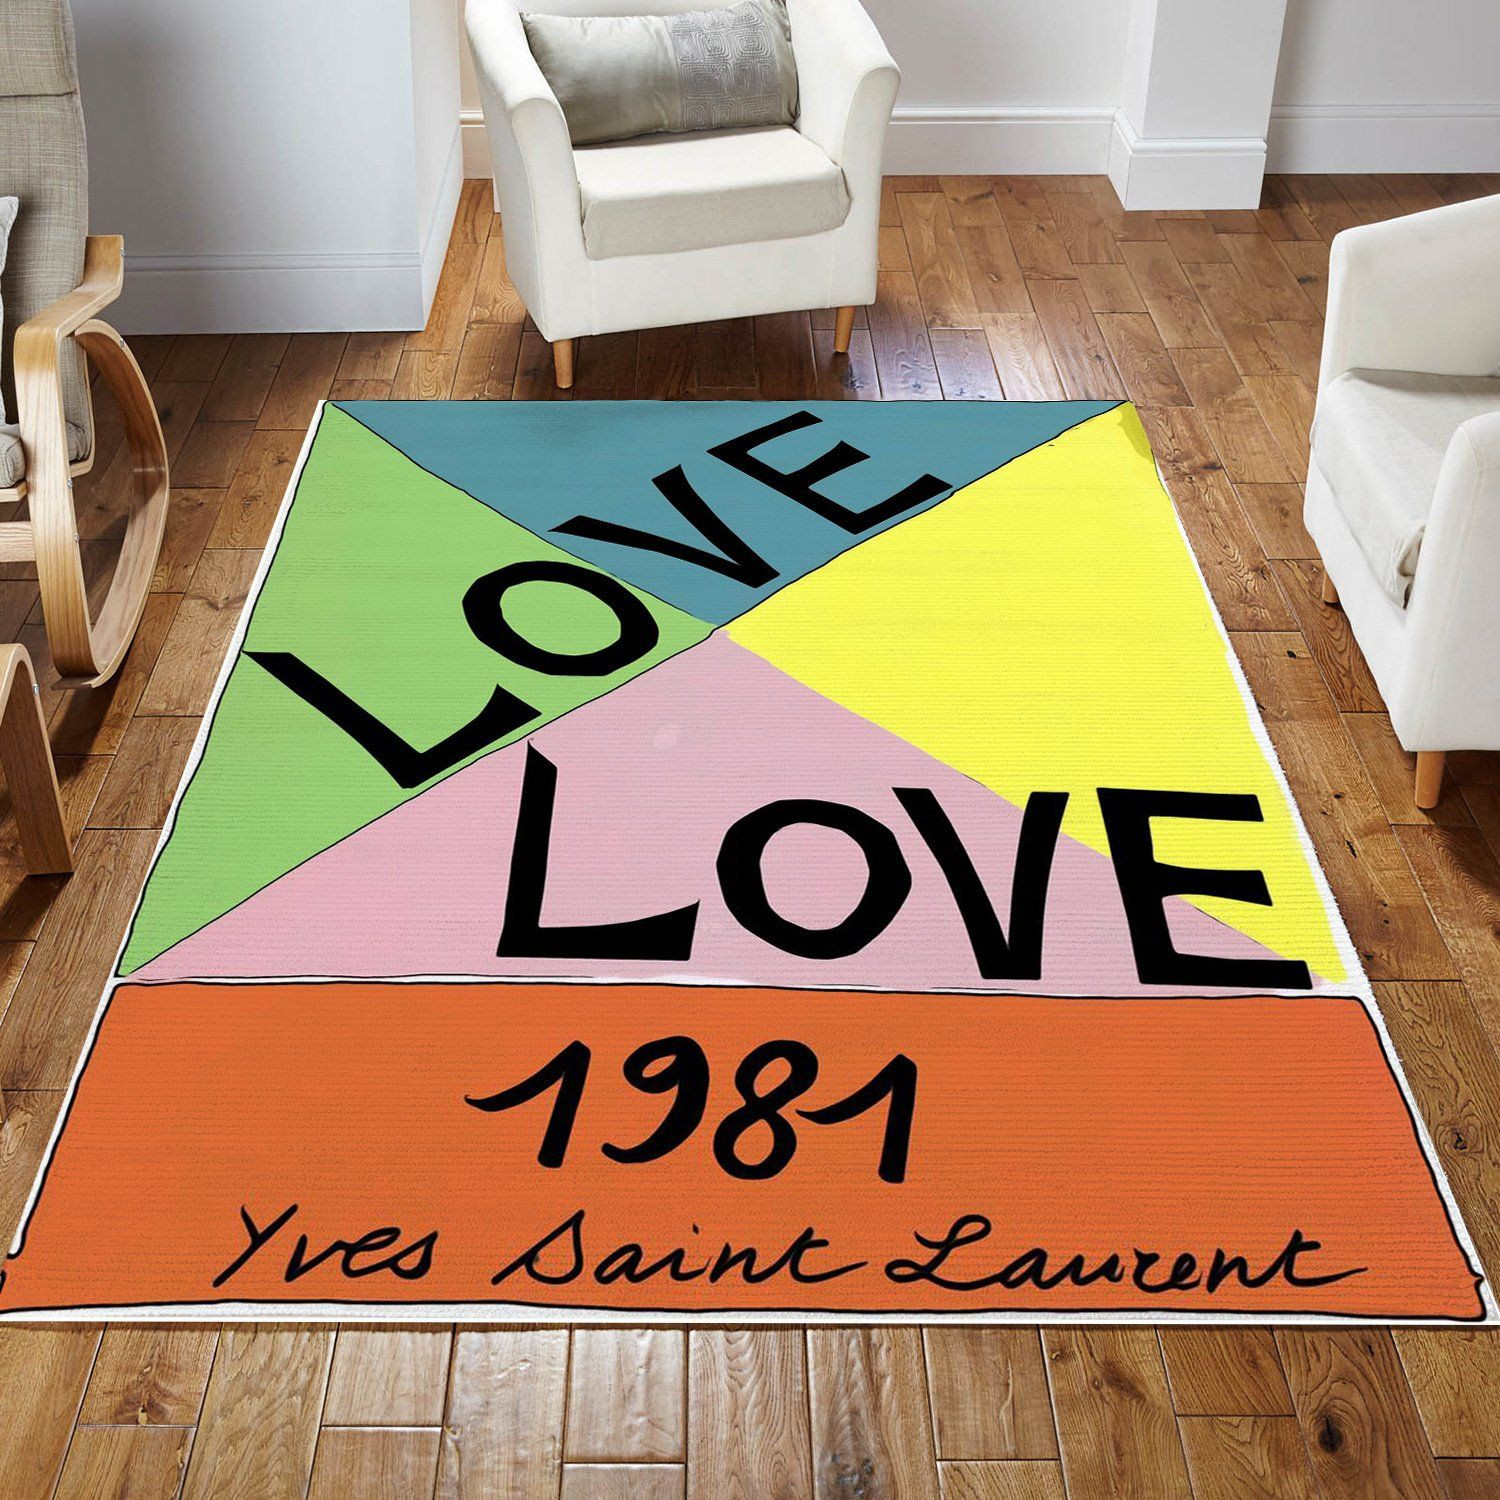 Ysl Vintage Love Poster Area Rugs Living Room Rug Christmas Gift US Decor - Indoor Outdoor Rugs 3